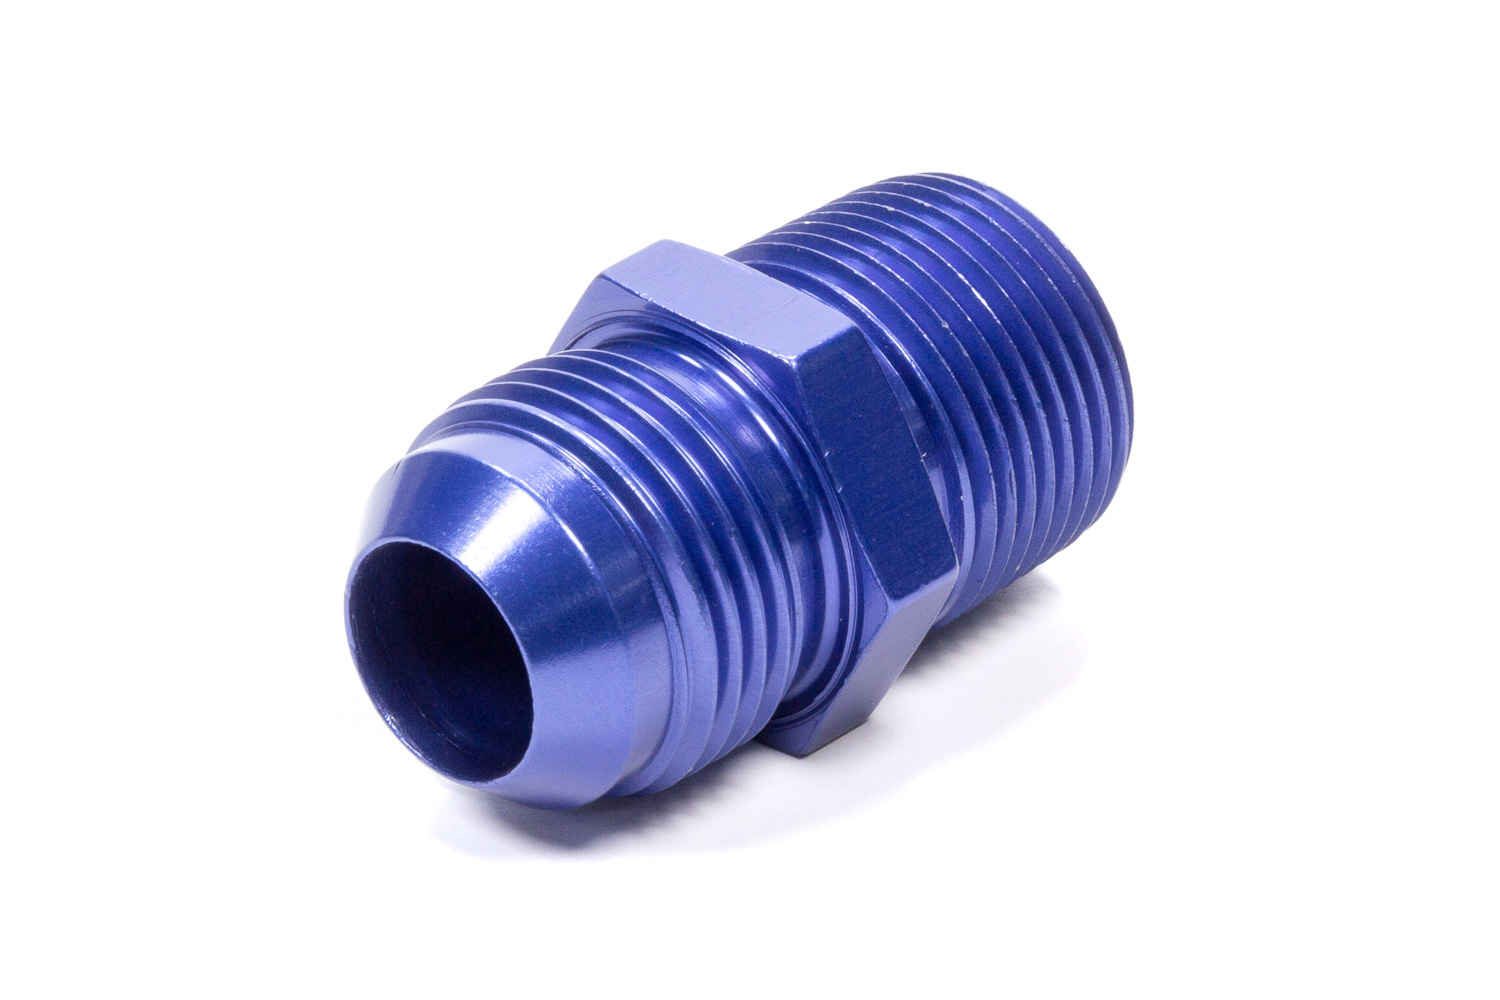 Fragola 481610 - Straight Adapter Fitting #10 x 1/2 MPT